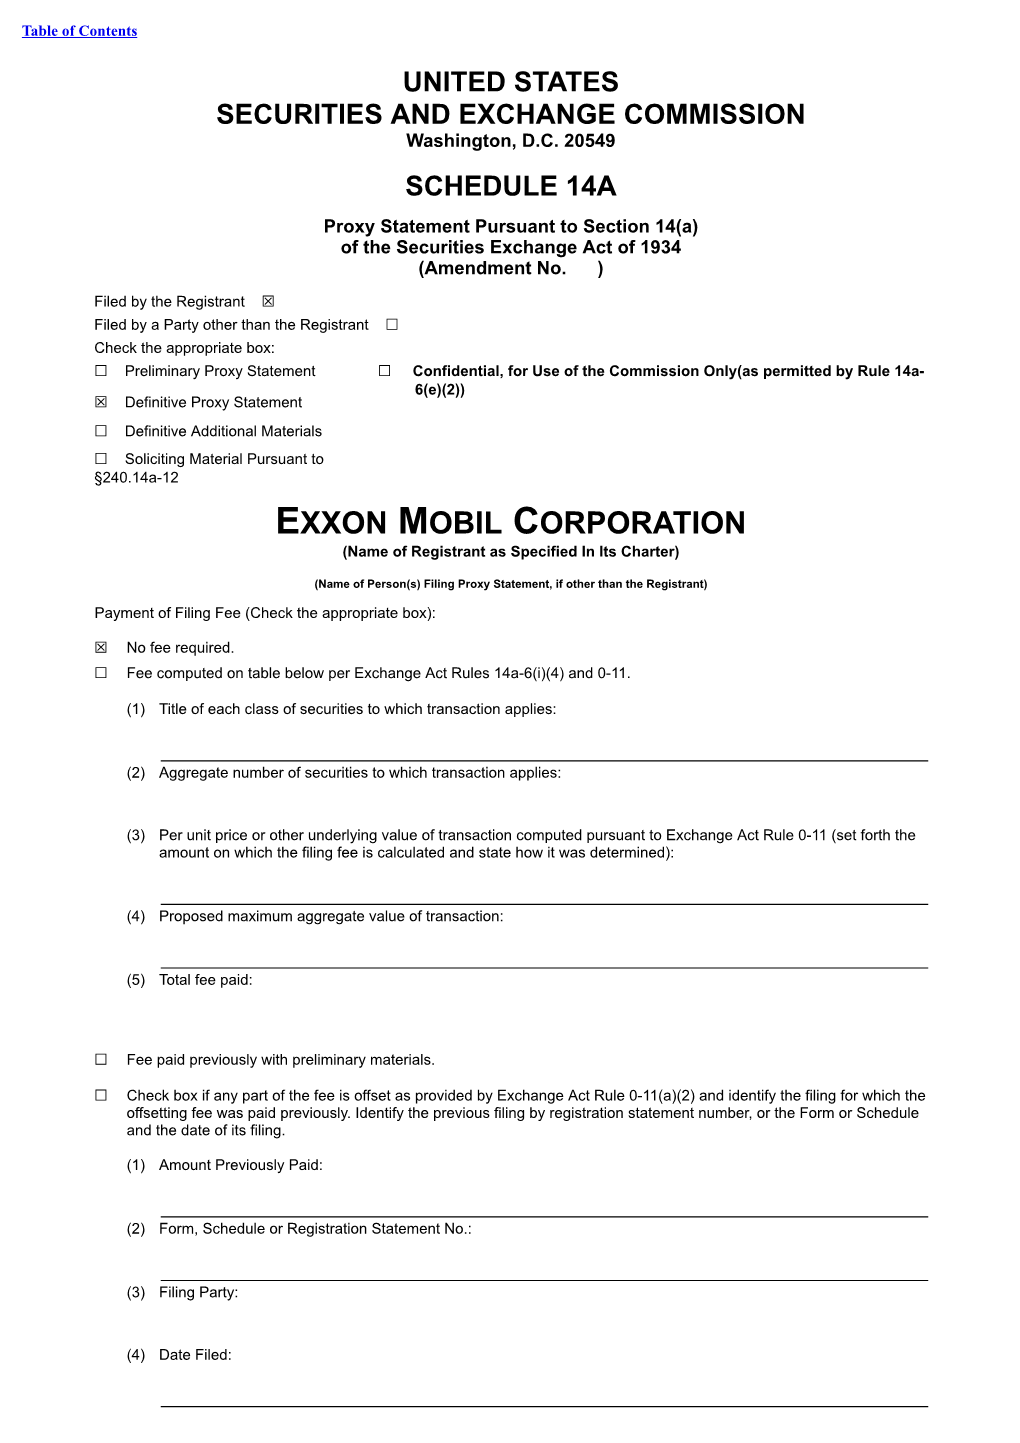 EXXON MOBIL CORPORATION (Name of Registrant As Specified in Its Charter)